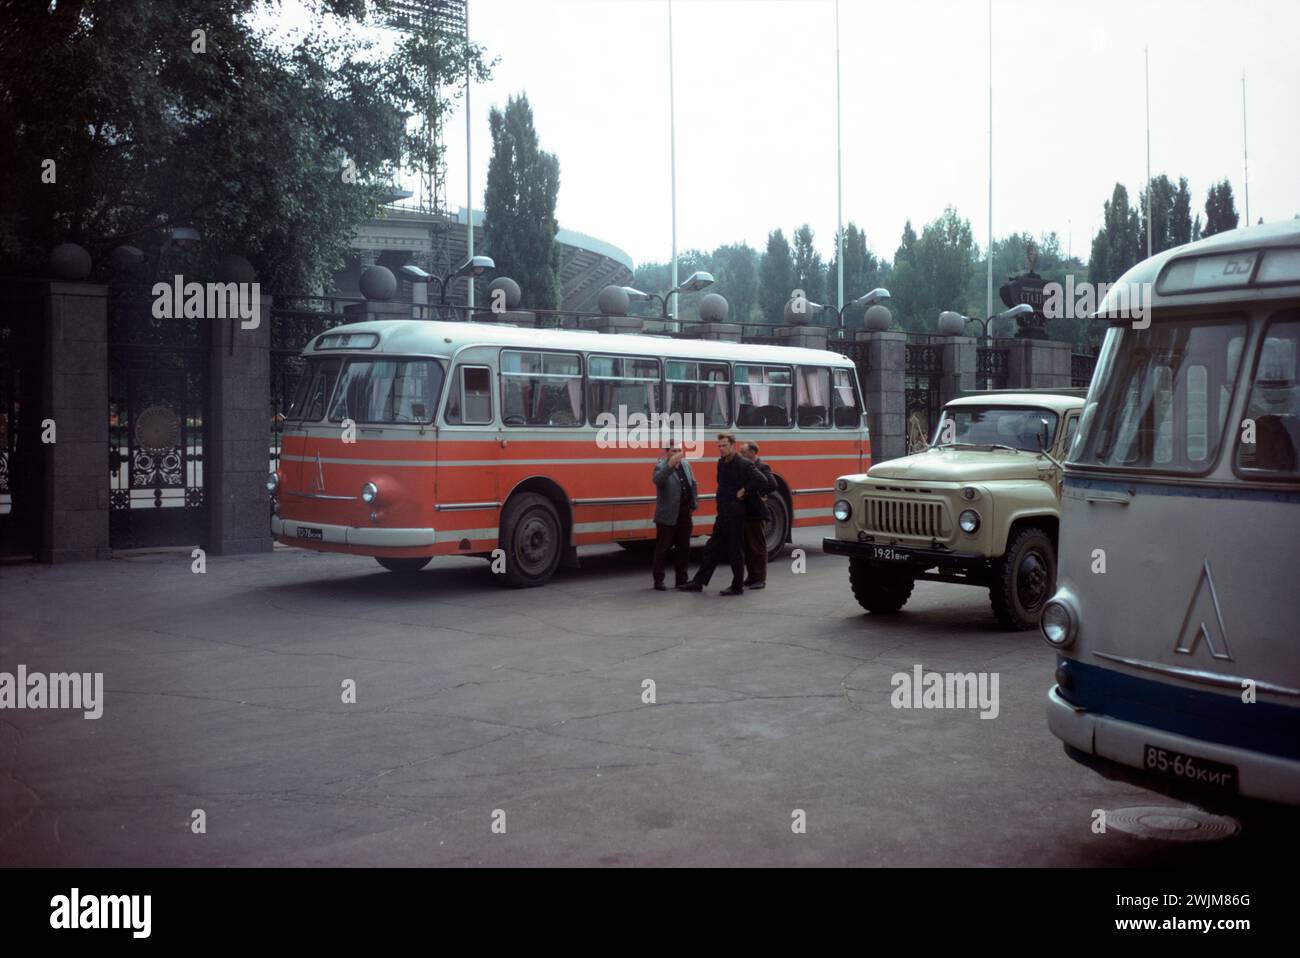 LAZ-695 buses and a GAZ-53 truck Stock Photo